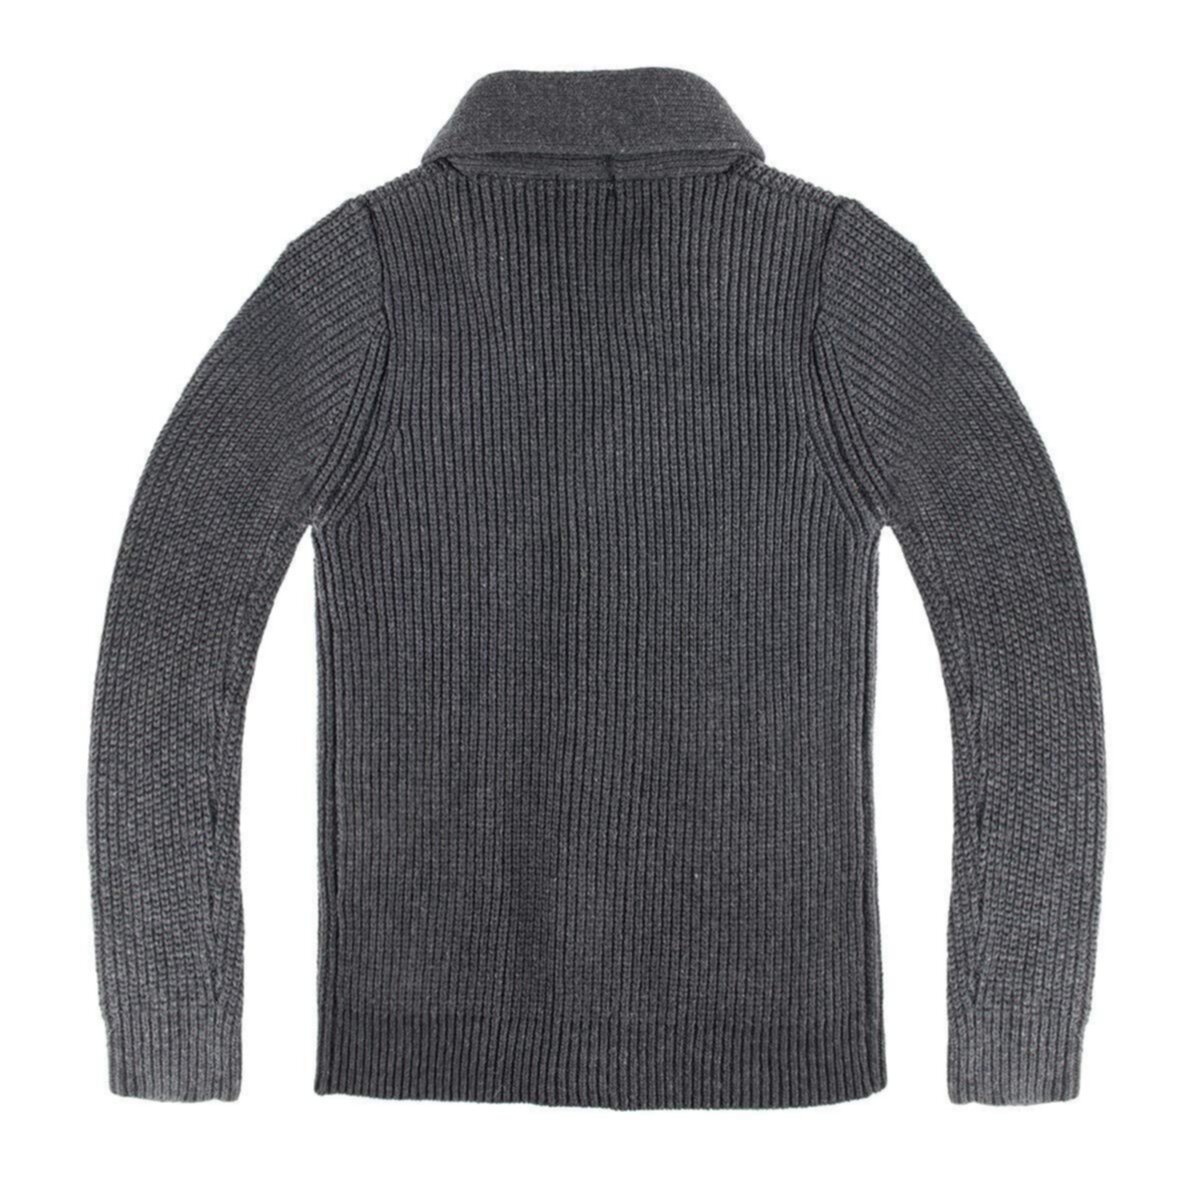 Loose Lapel Knitted Sweater Solid Casual Men′s Knitwear